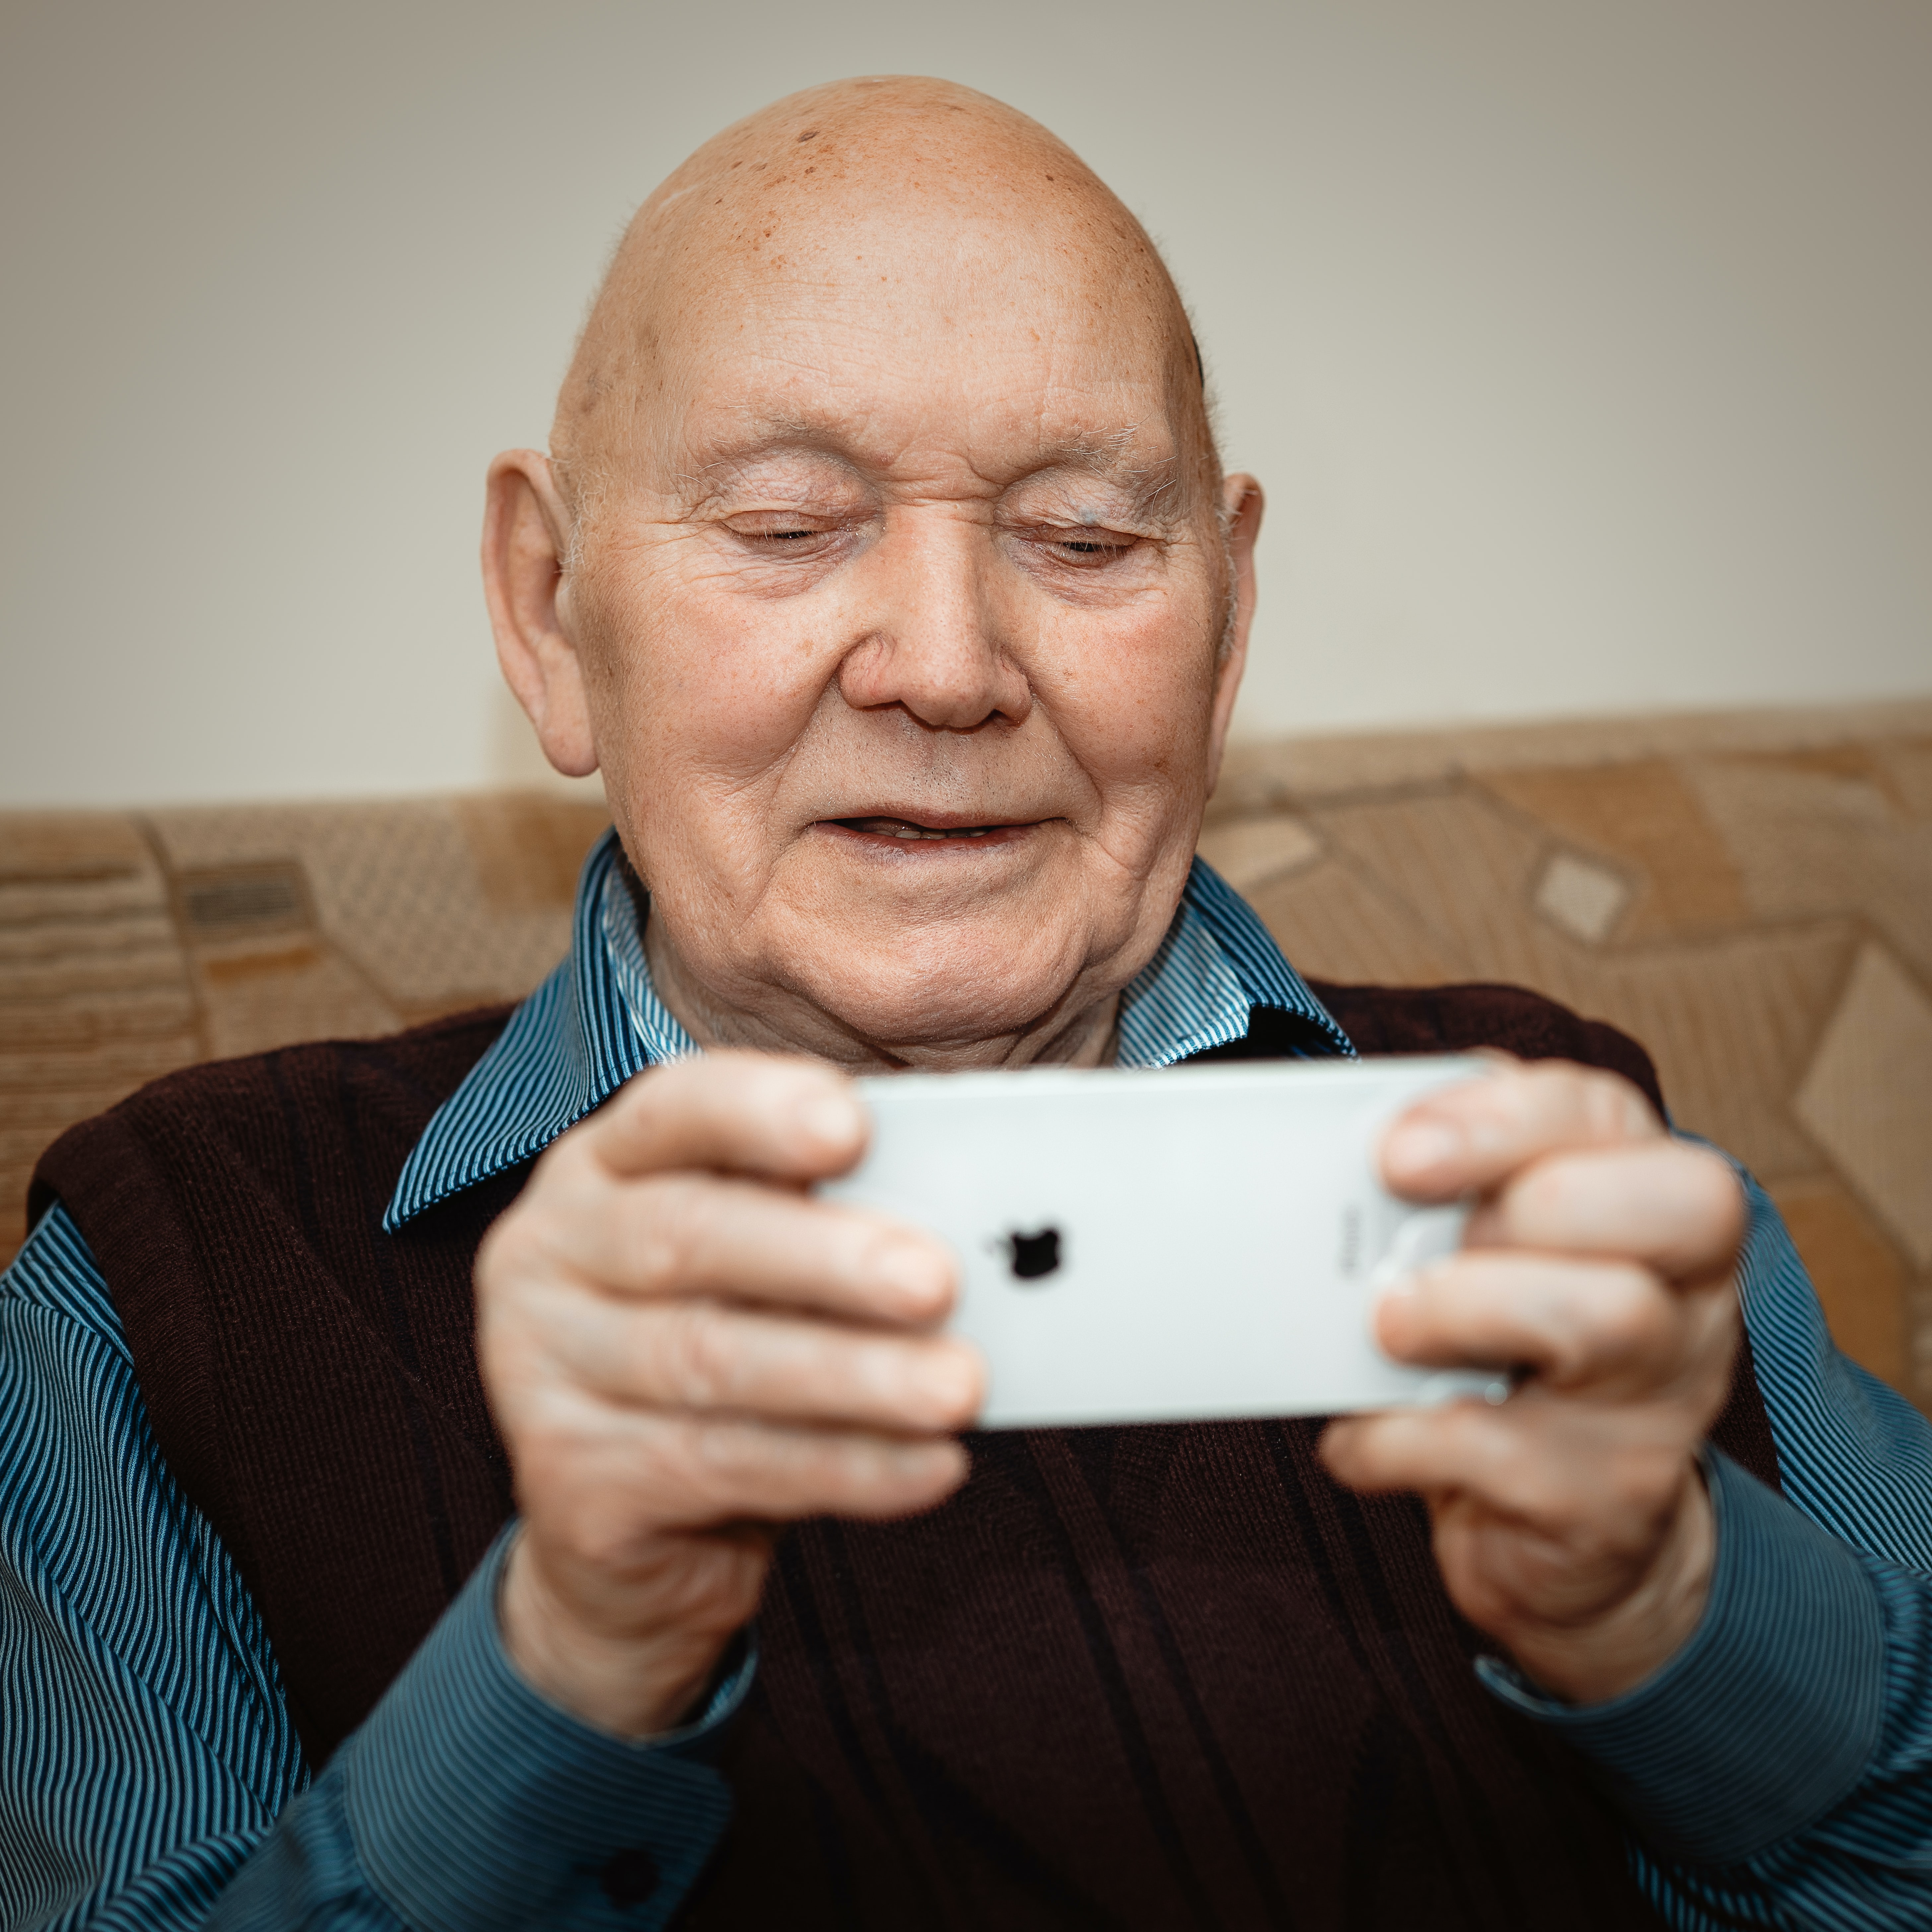 Old man holding up and looking at an iphone. 